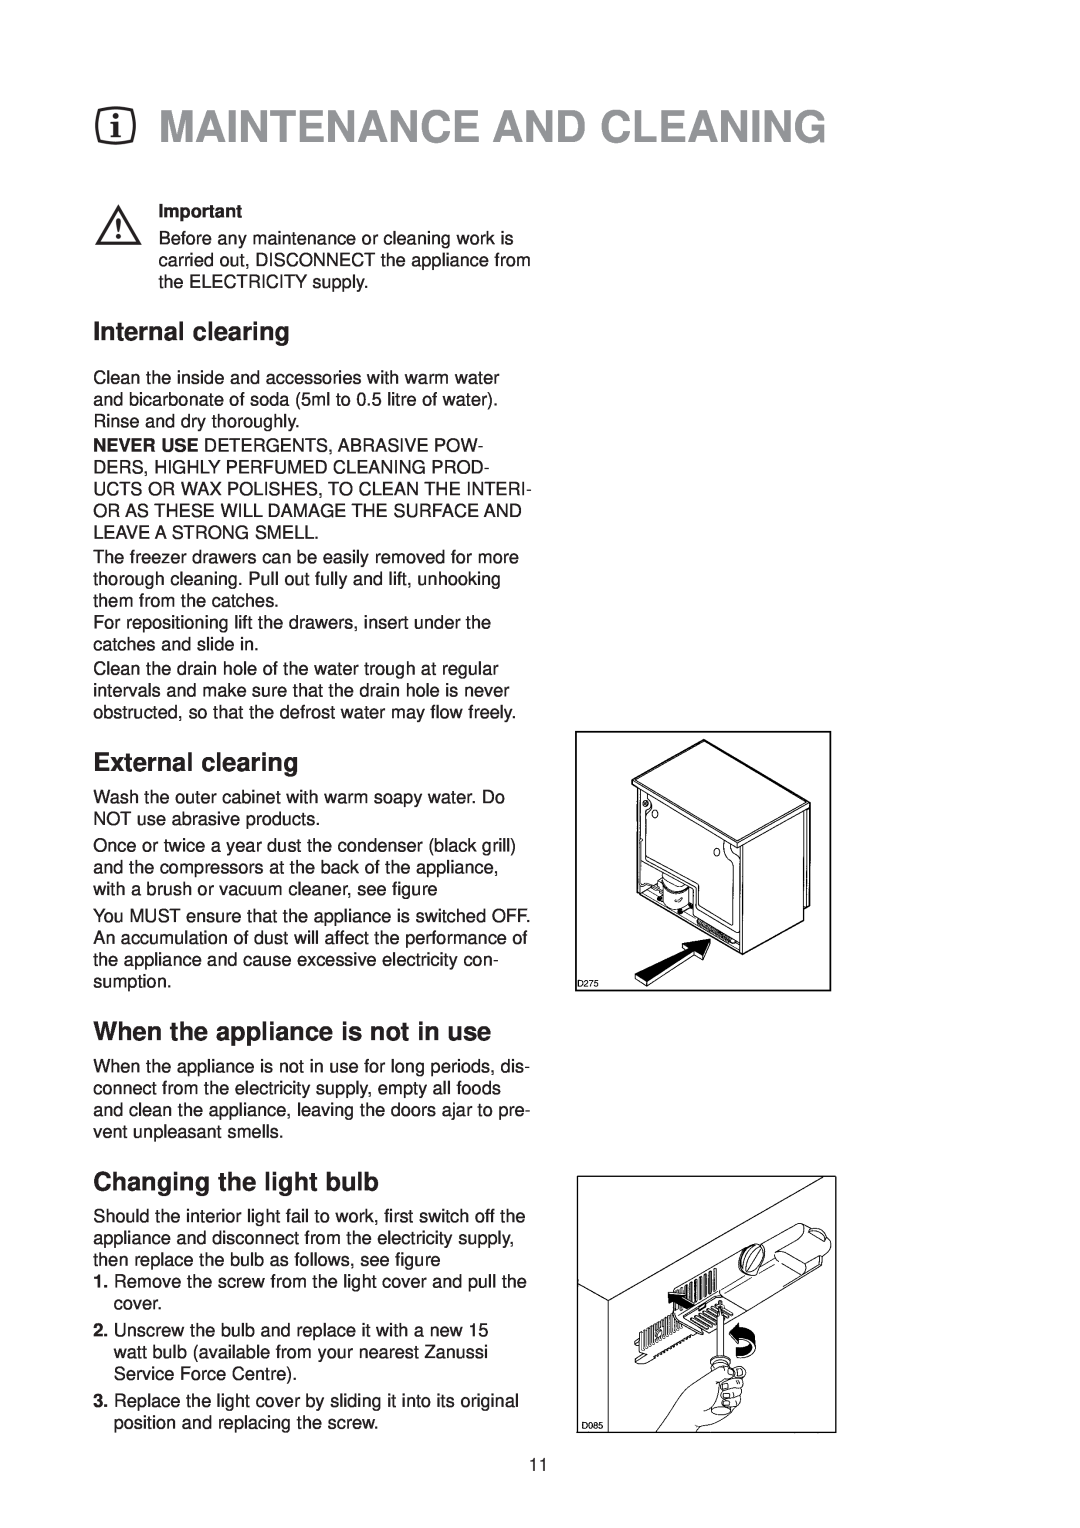 Zanussi ZT 45/30 manual Maintenance And Cleaning, Internal clearing, External clearing, When the appliance is not in use 